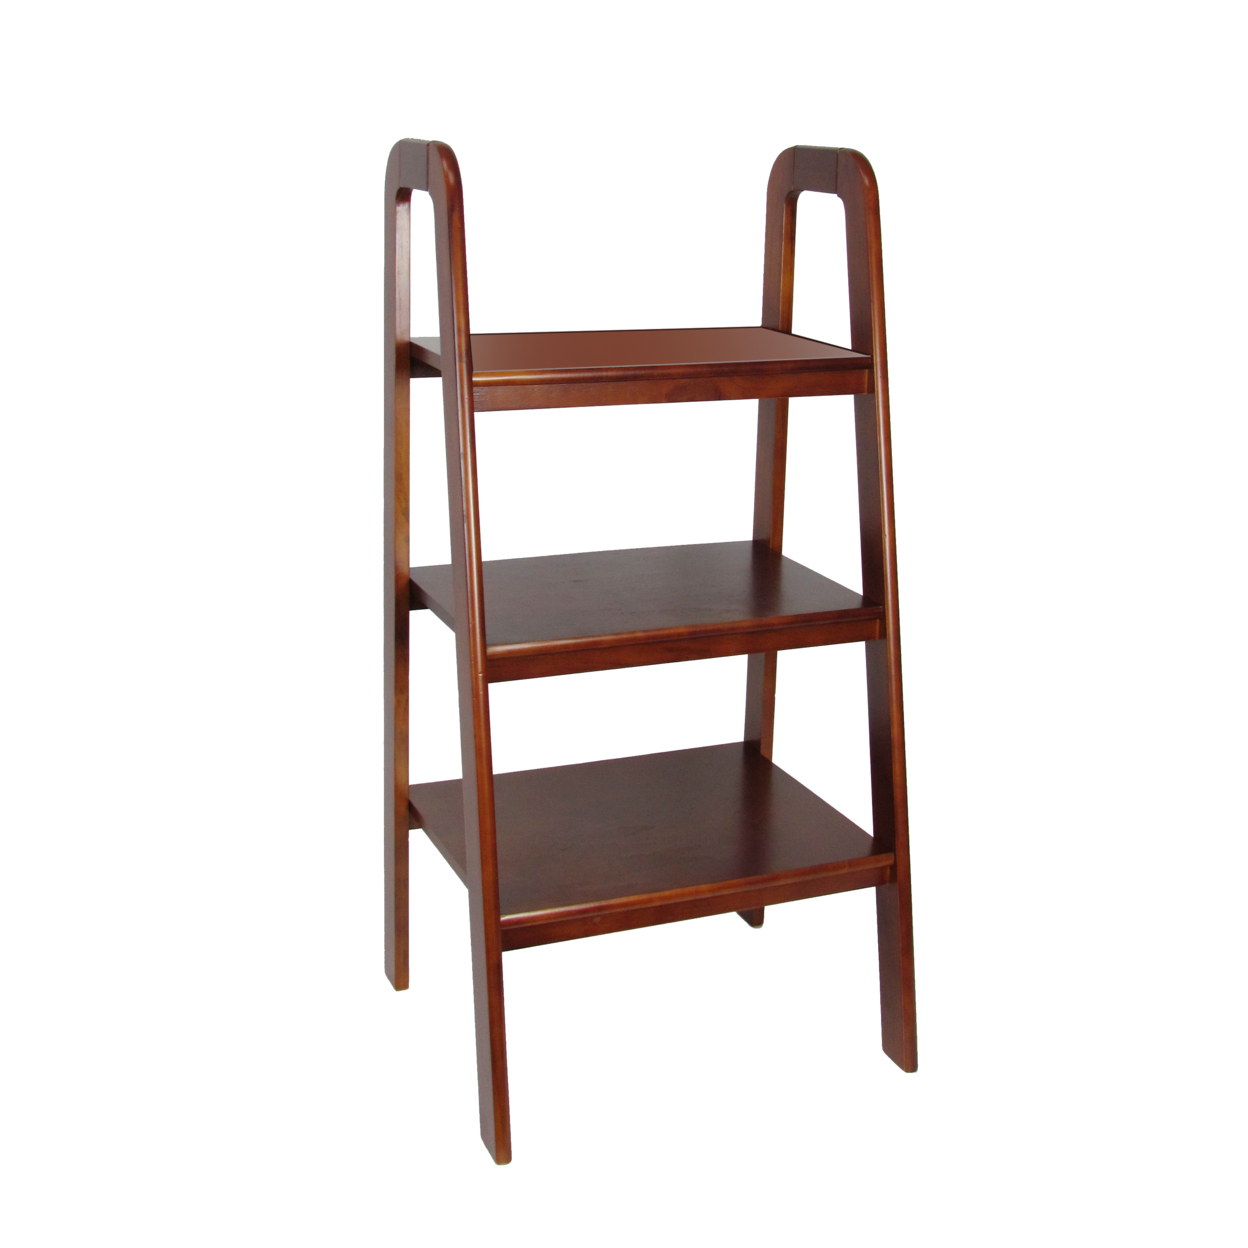 3 Tier Wooden Storage Ladder Stand With Open Back And Sides, Brown- Saltoro Sherpi